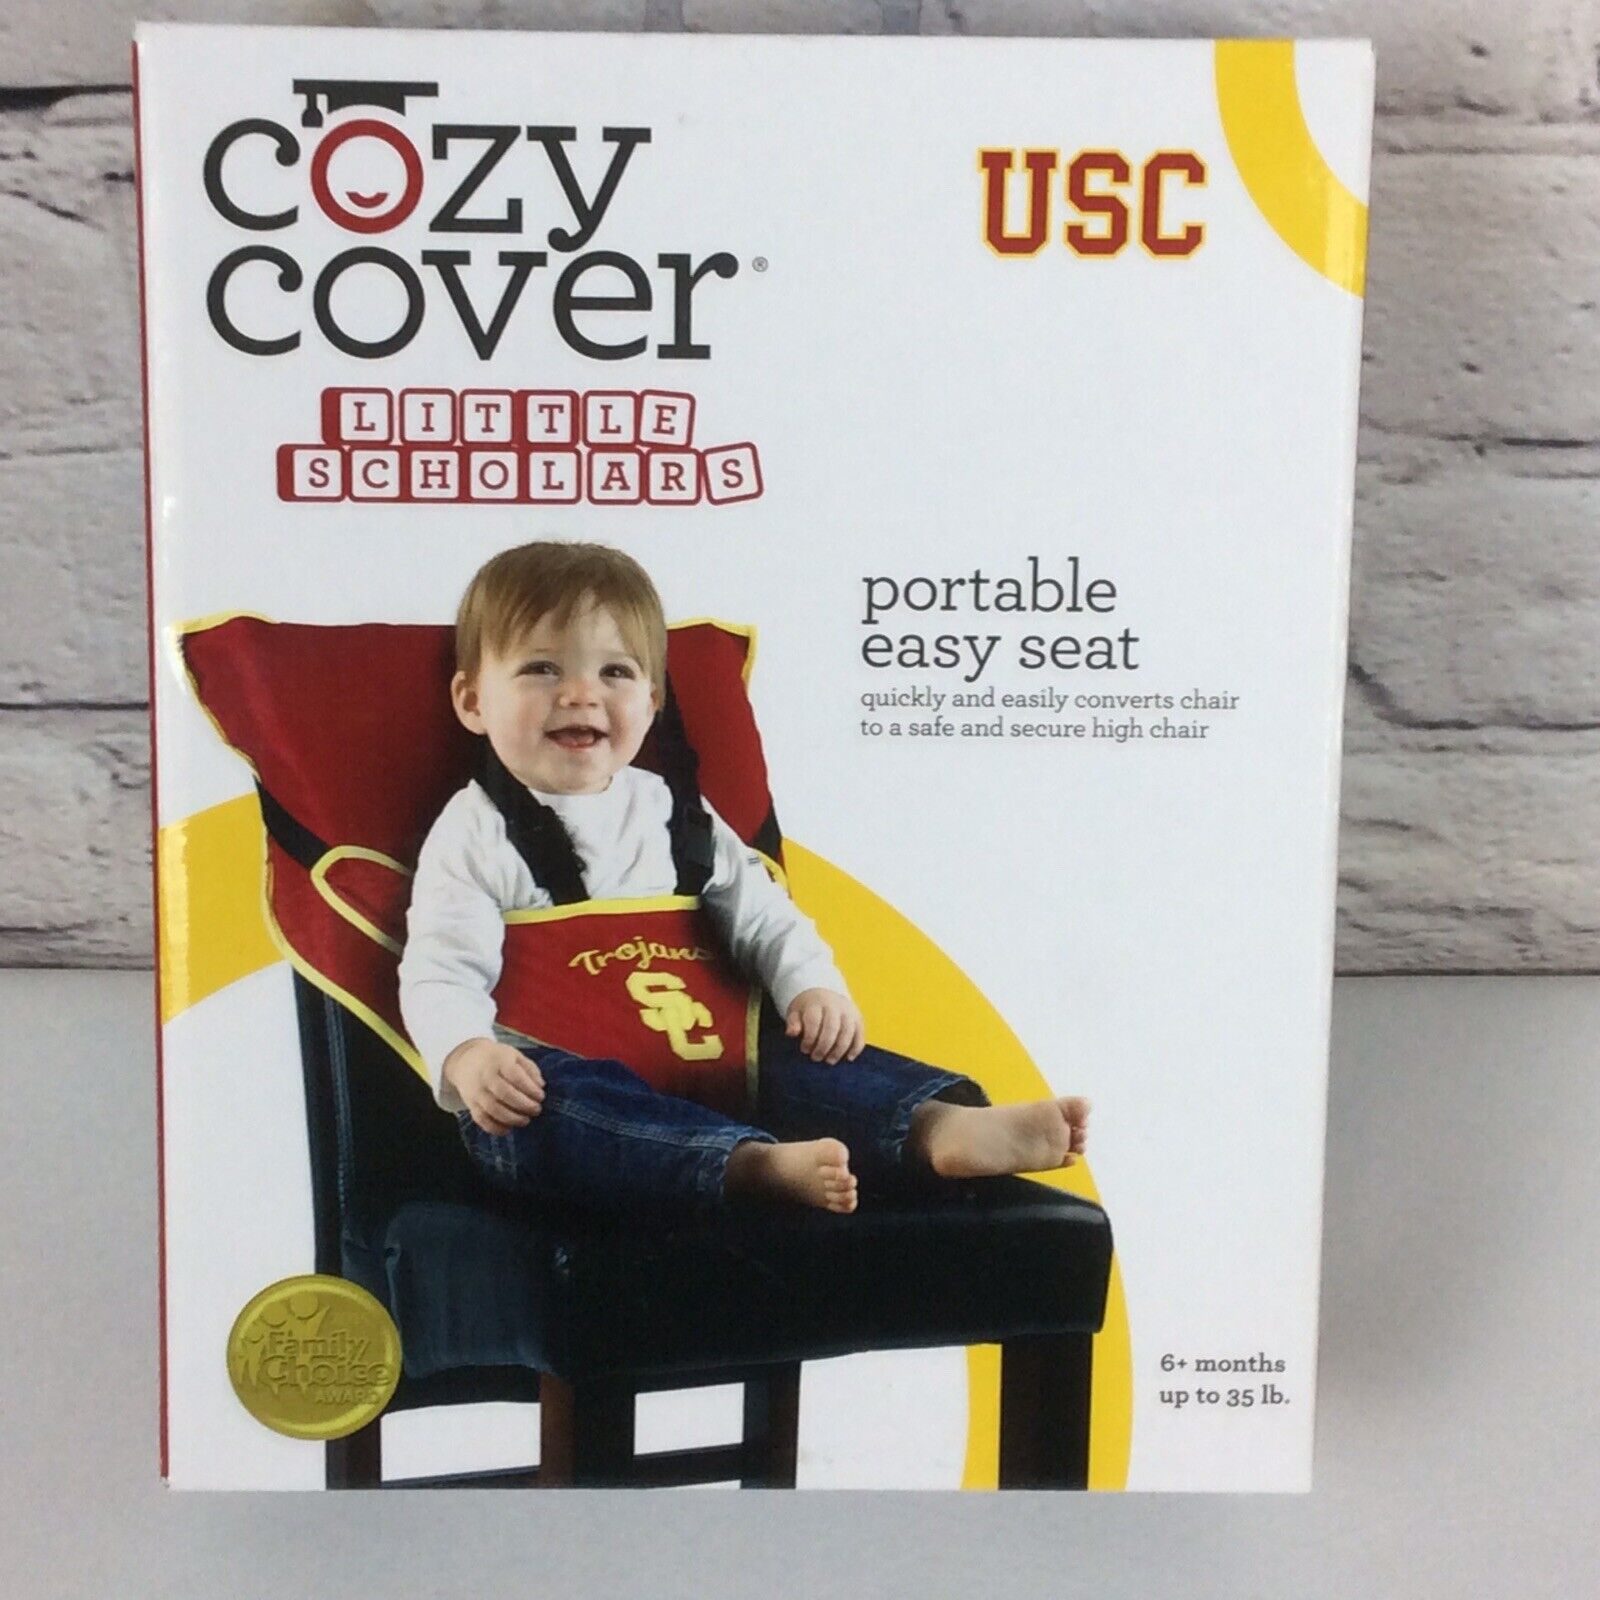 Ncaa Usc Trojans Cozy Cover Portable Easy Seat Game Day Tailgating School Spirit